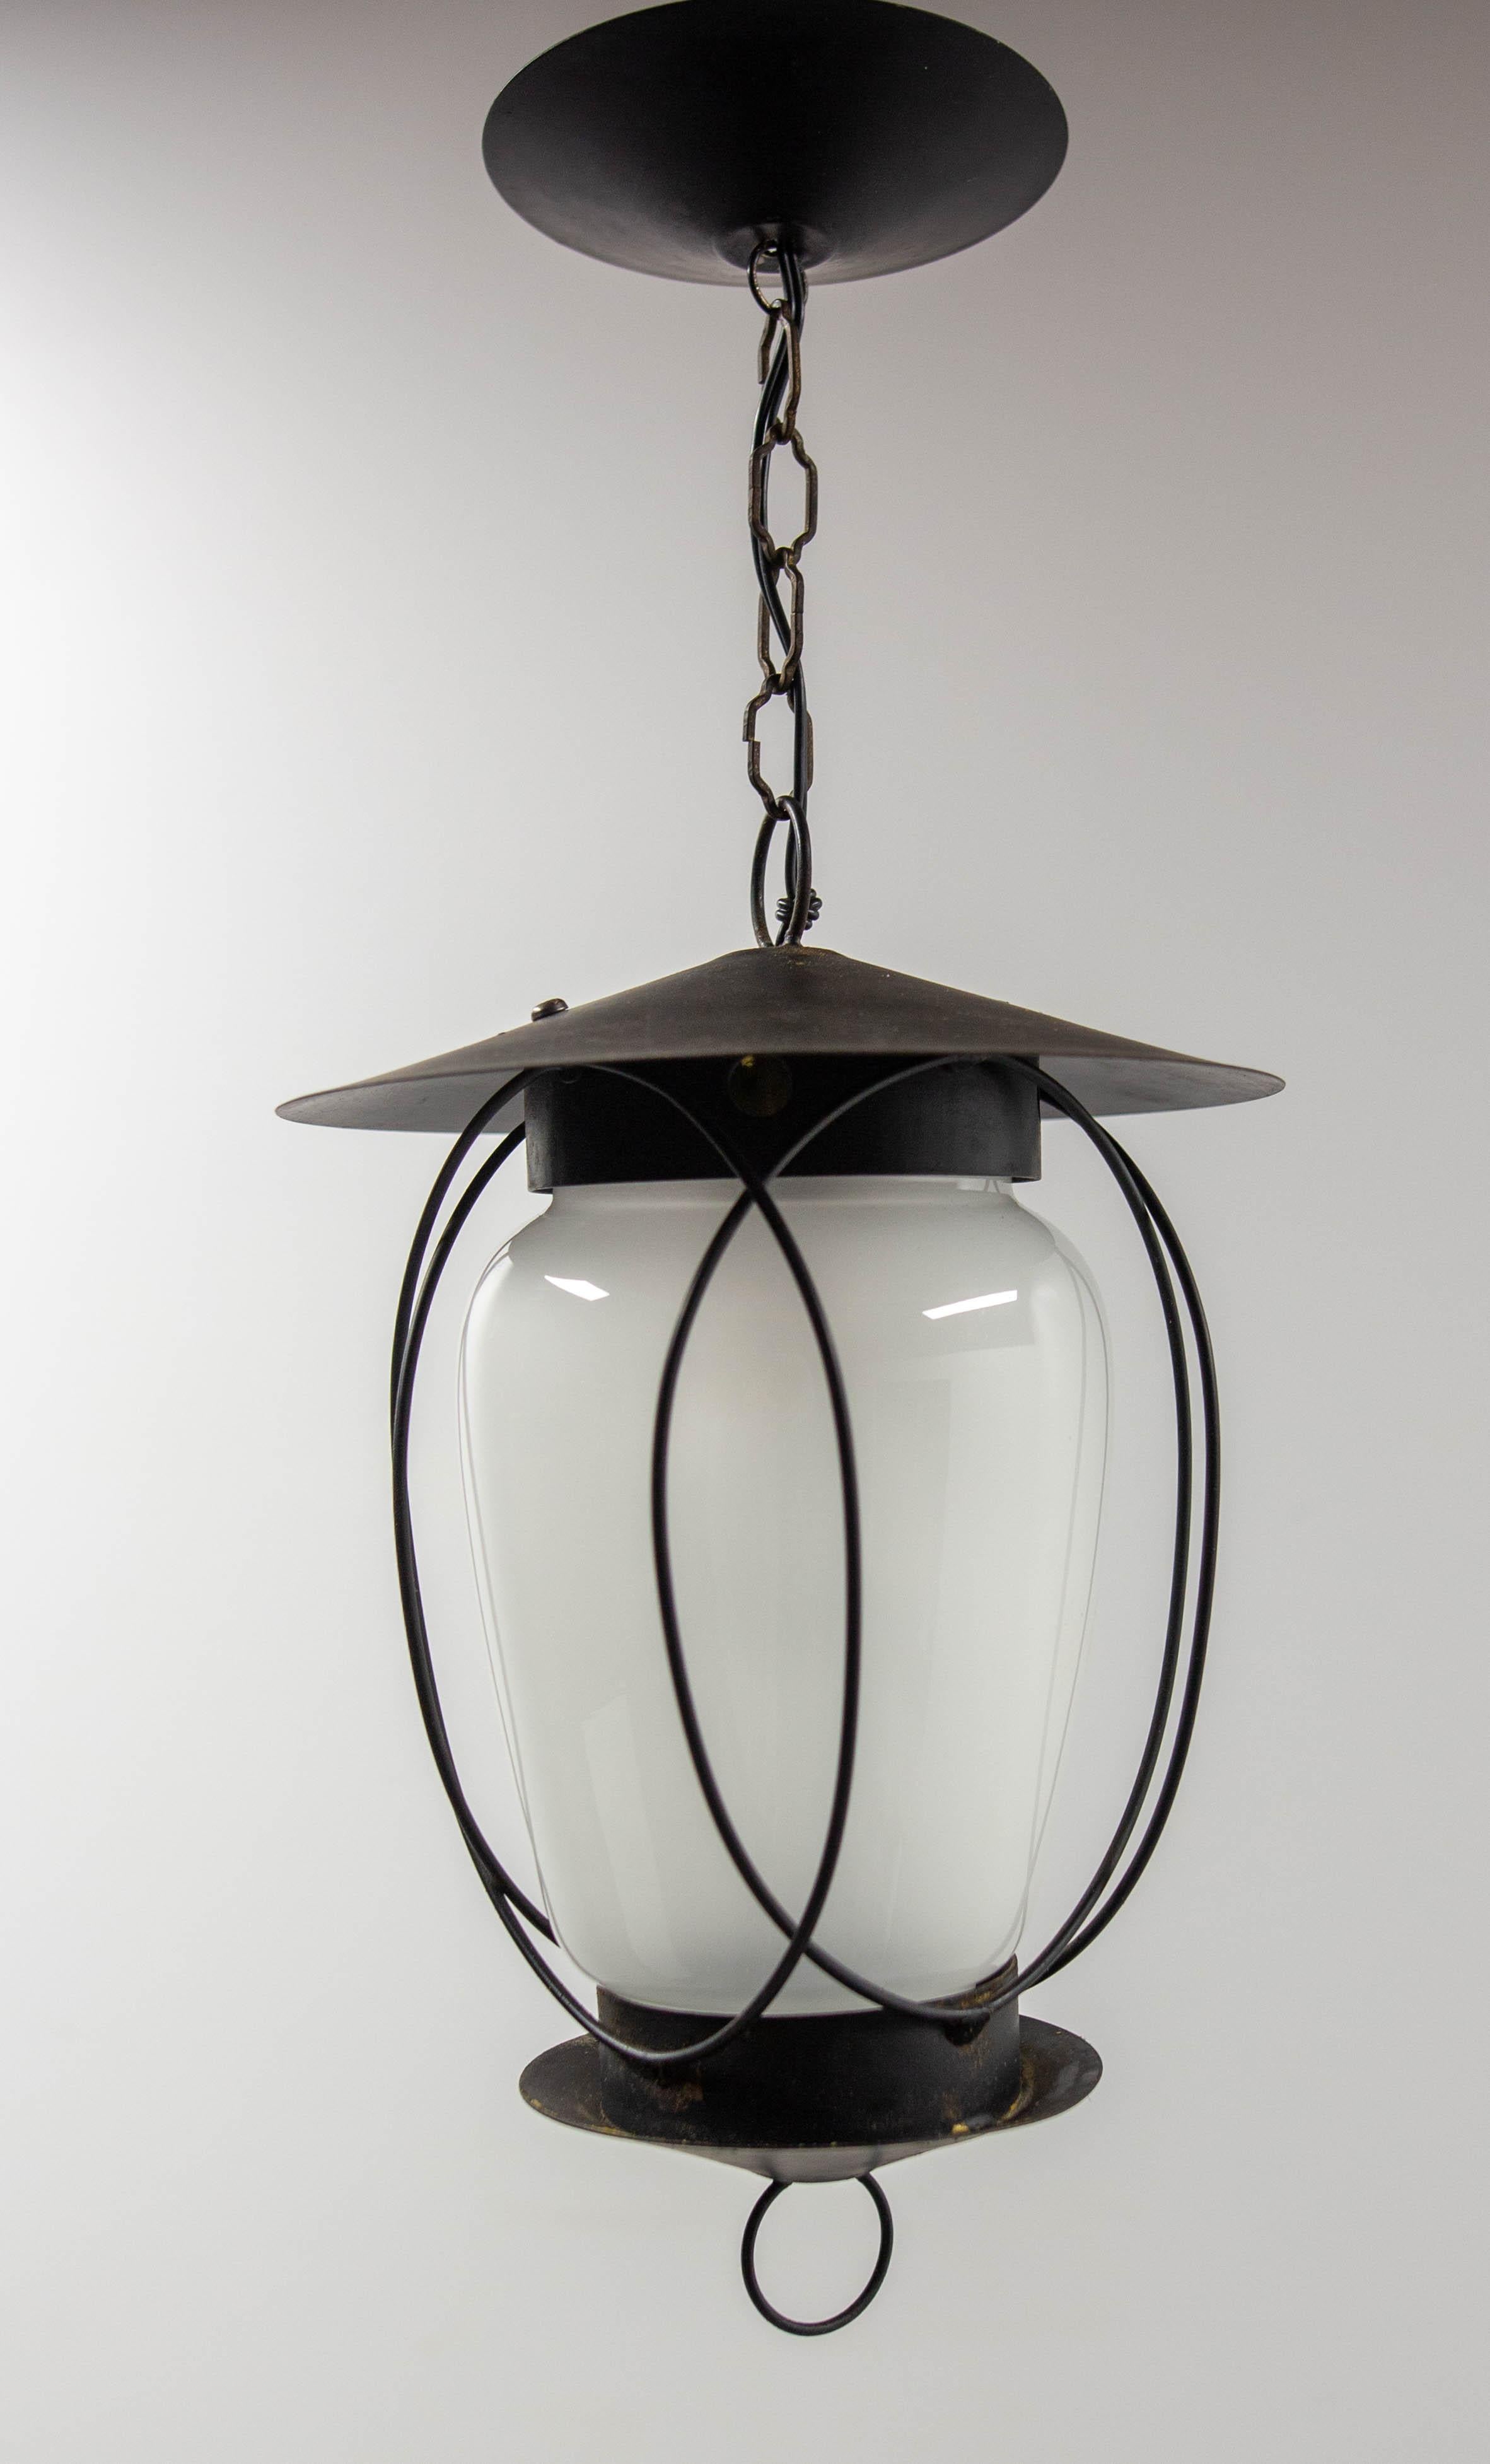 20th Century French Ceiling Lamp Wrought Iron and Glass Pendant Lustre, circa 1960 For Sale